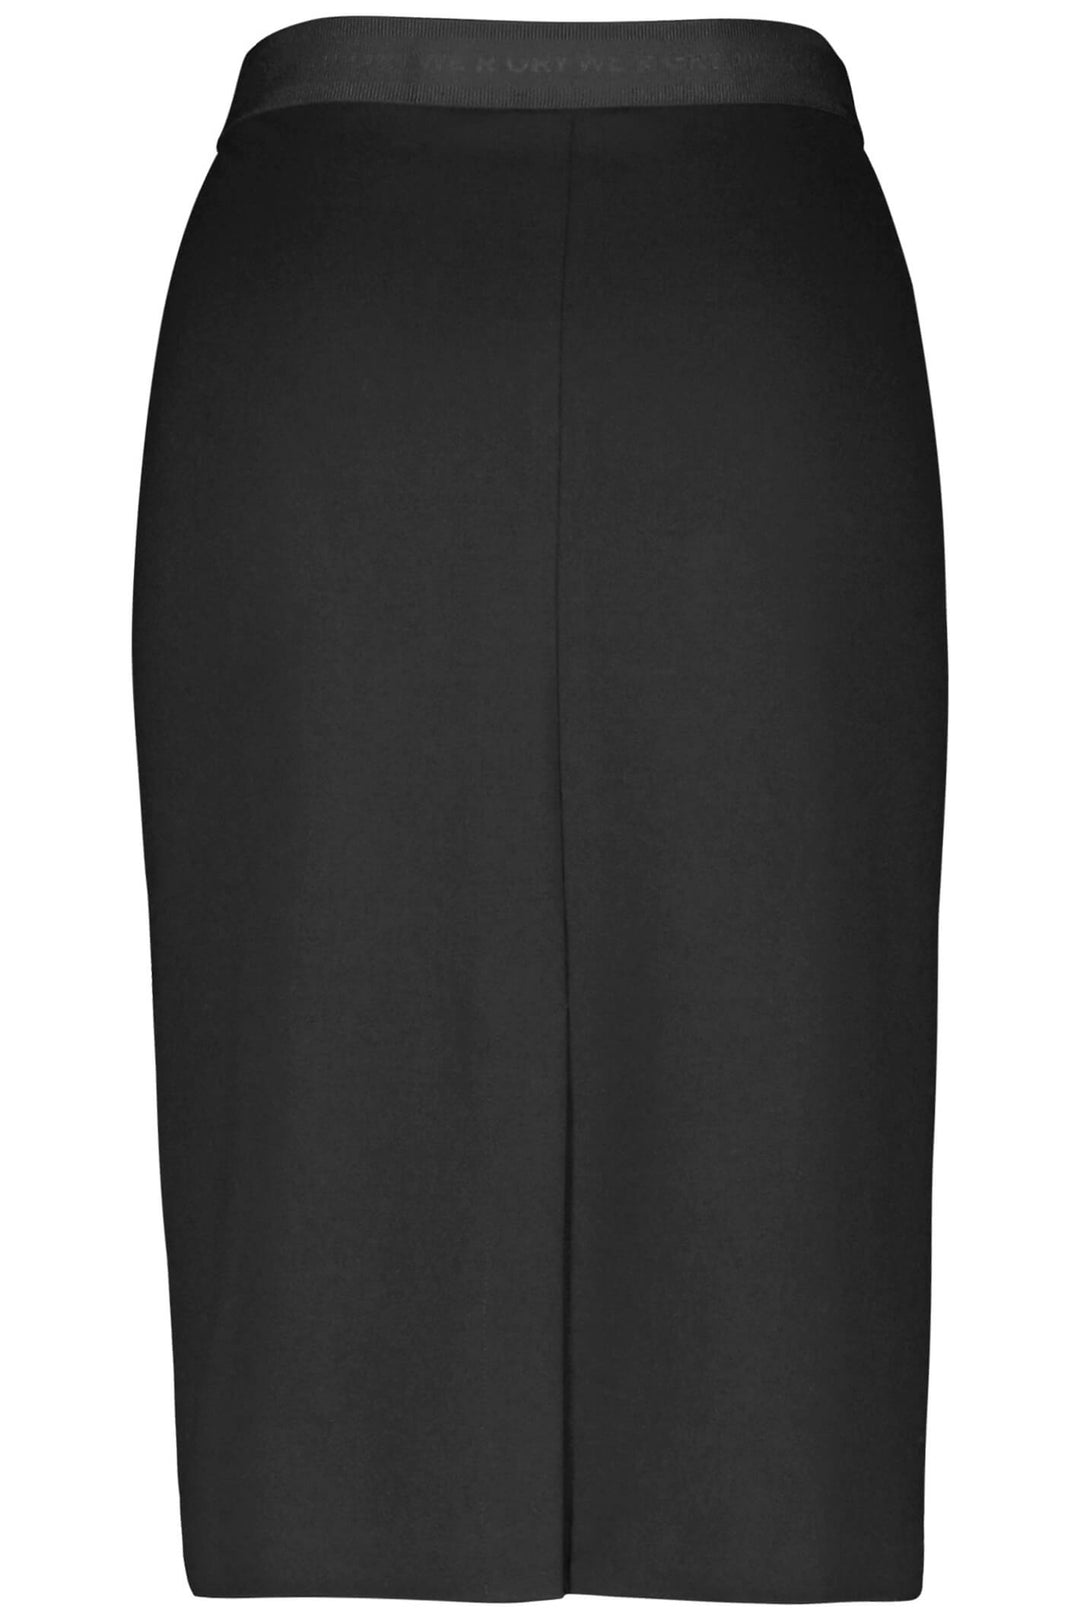 Gerry Weber 111022-66311 Black Knee Length Pull-On Pencil Skirt - Dotique Chesterfield